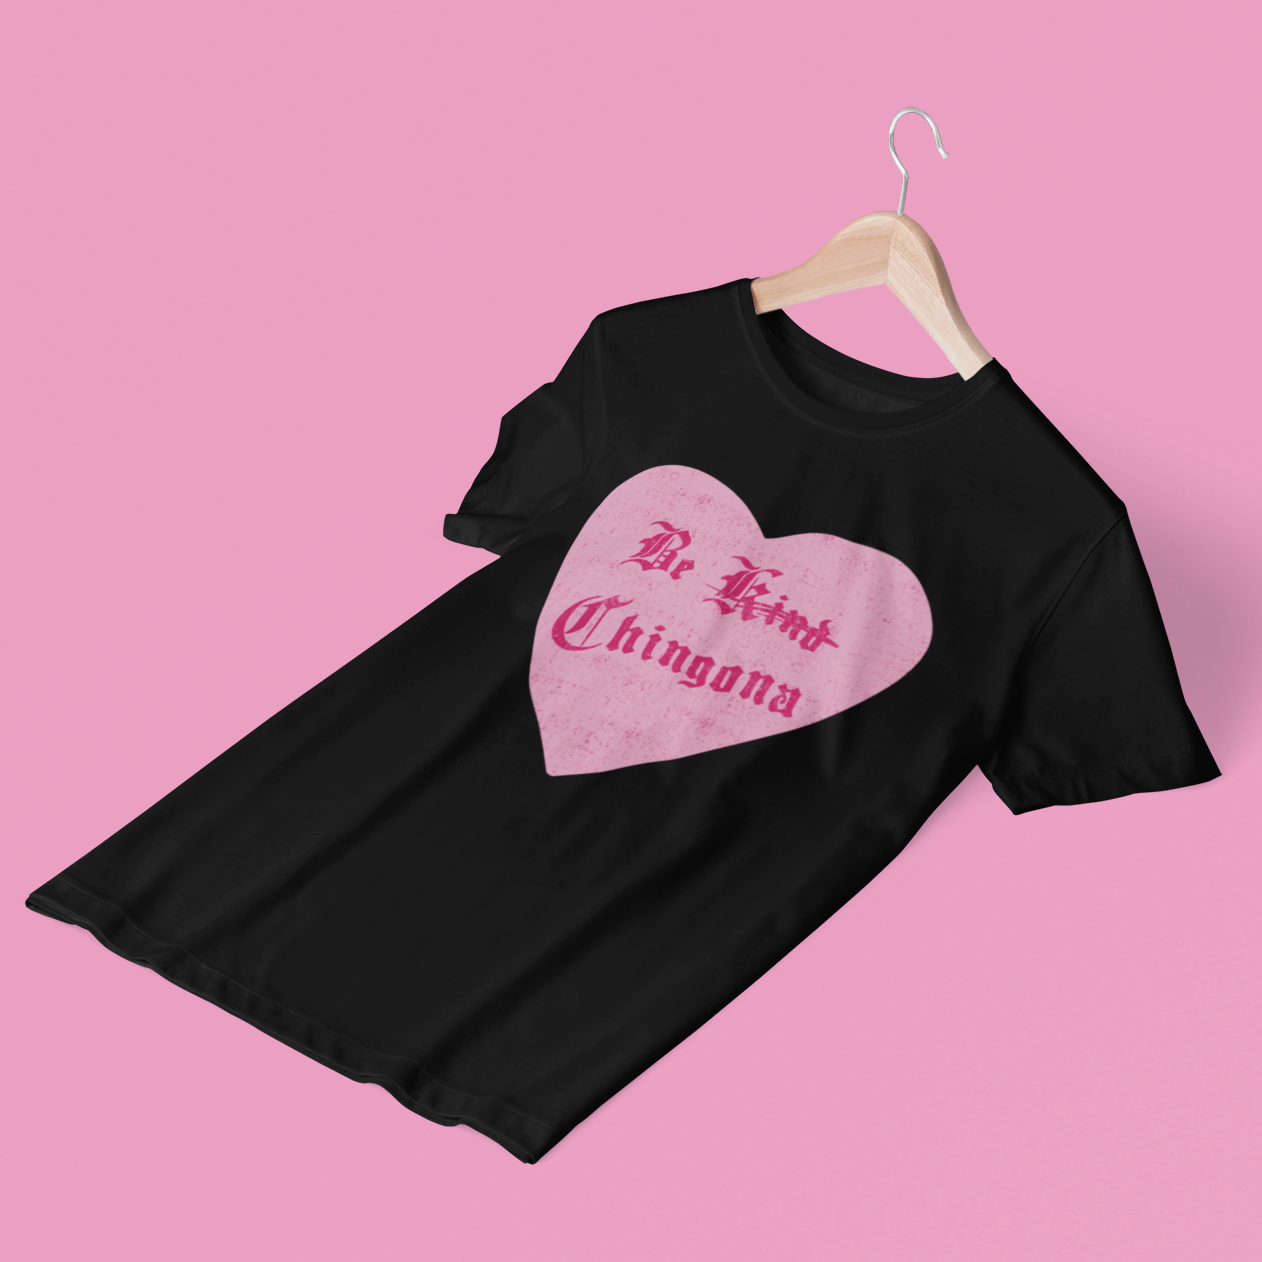 Funny and bold black t-shirt for Latina women with the phrase 'be kind chingona', with the word 'kind' crossed out, in a pink heart graphic and old-English style lettering